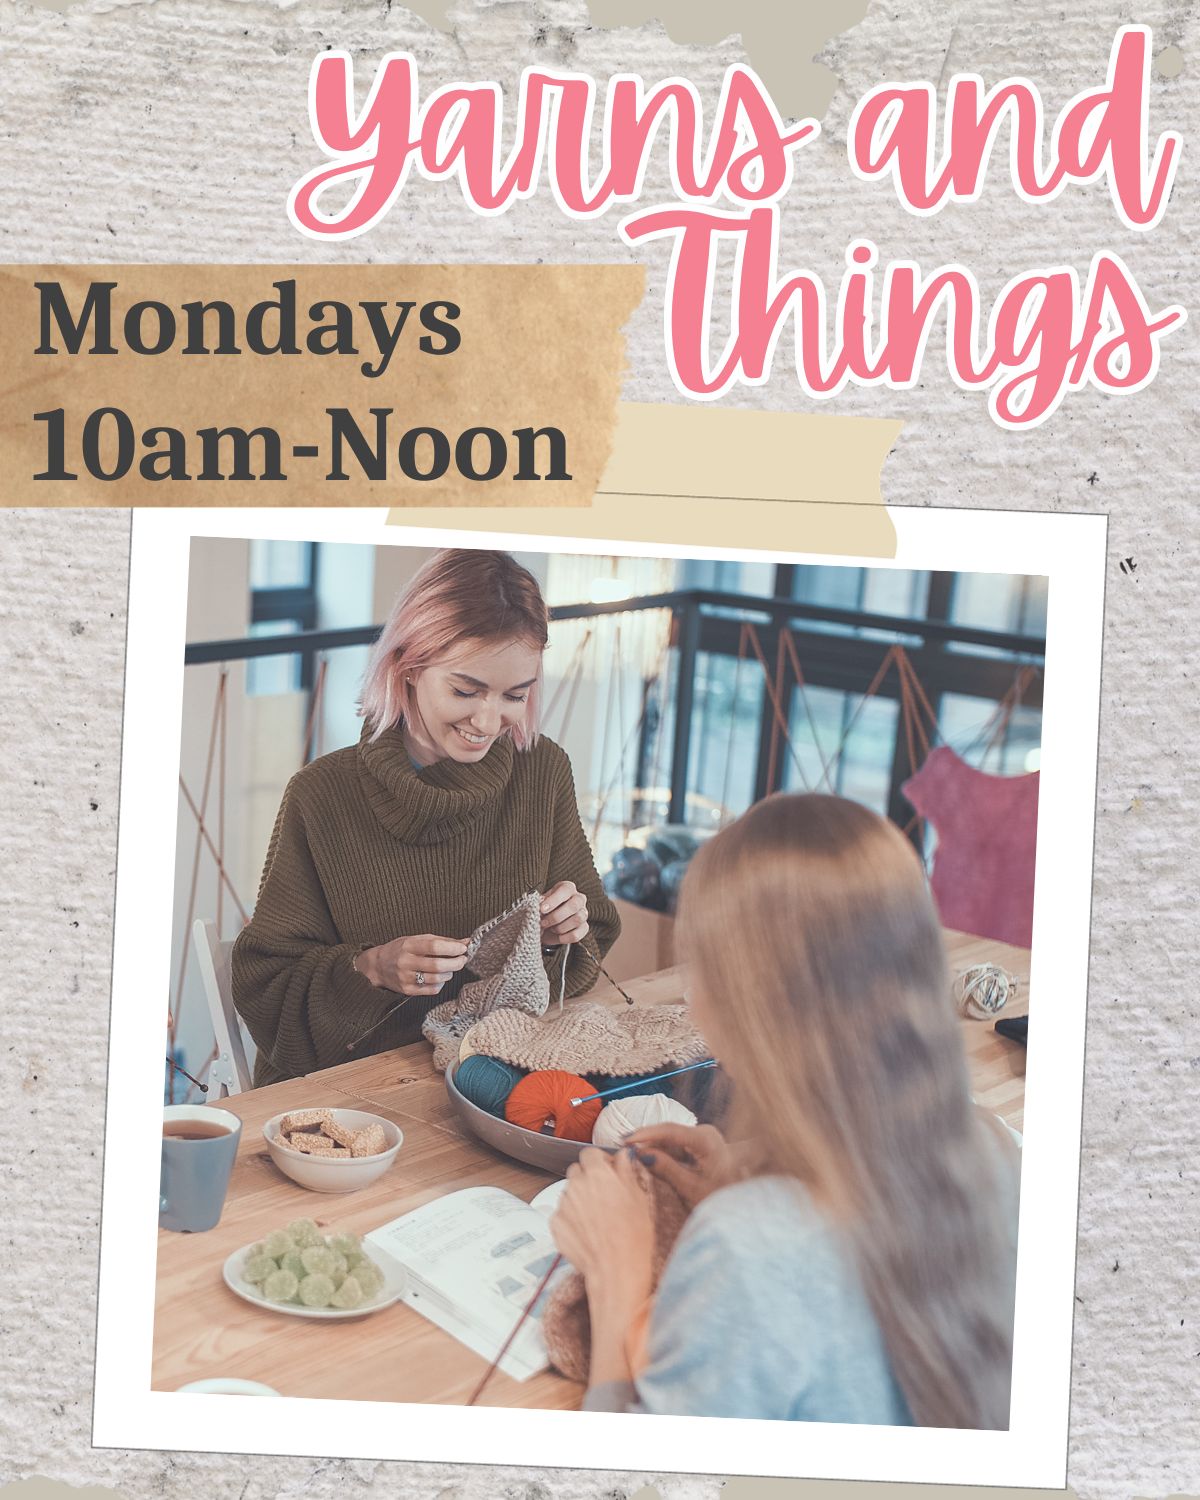 Yarn and Things: Mondays from 10am-Noon